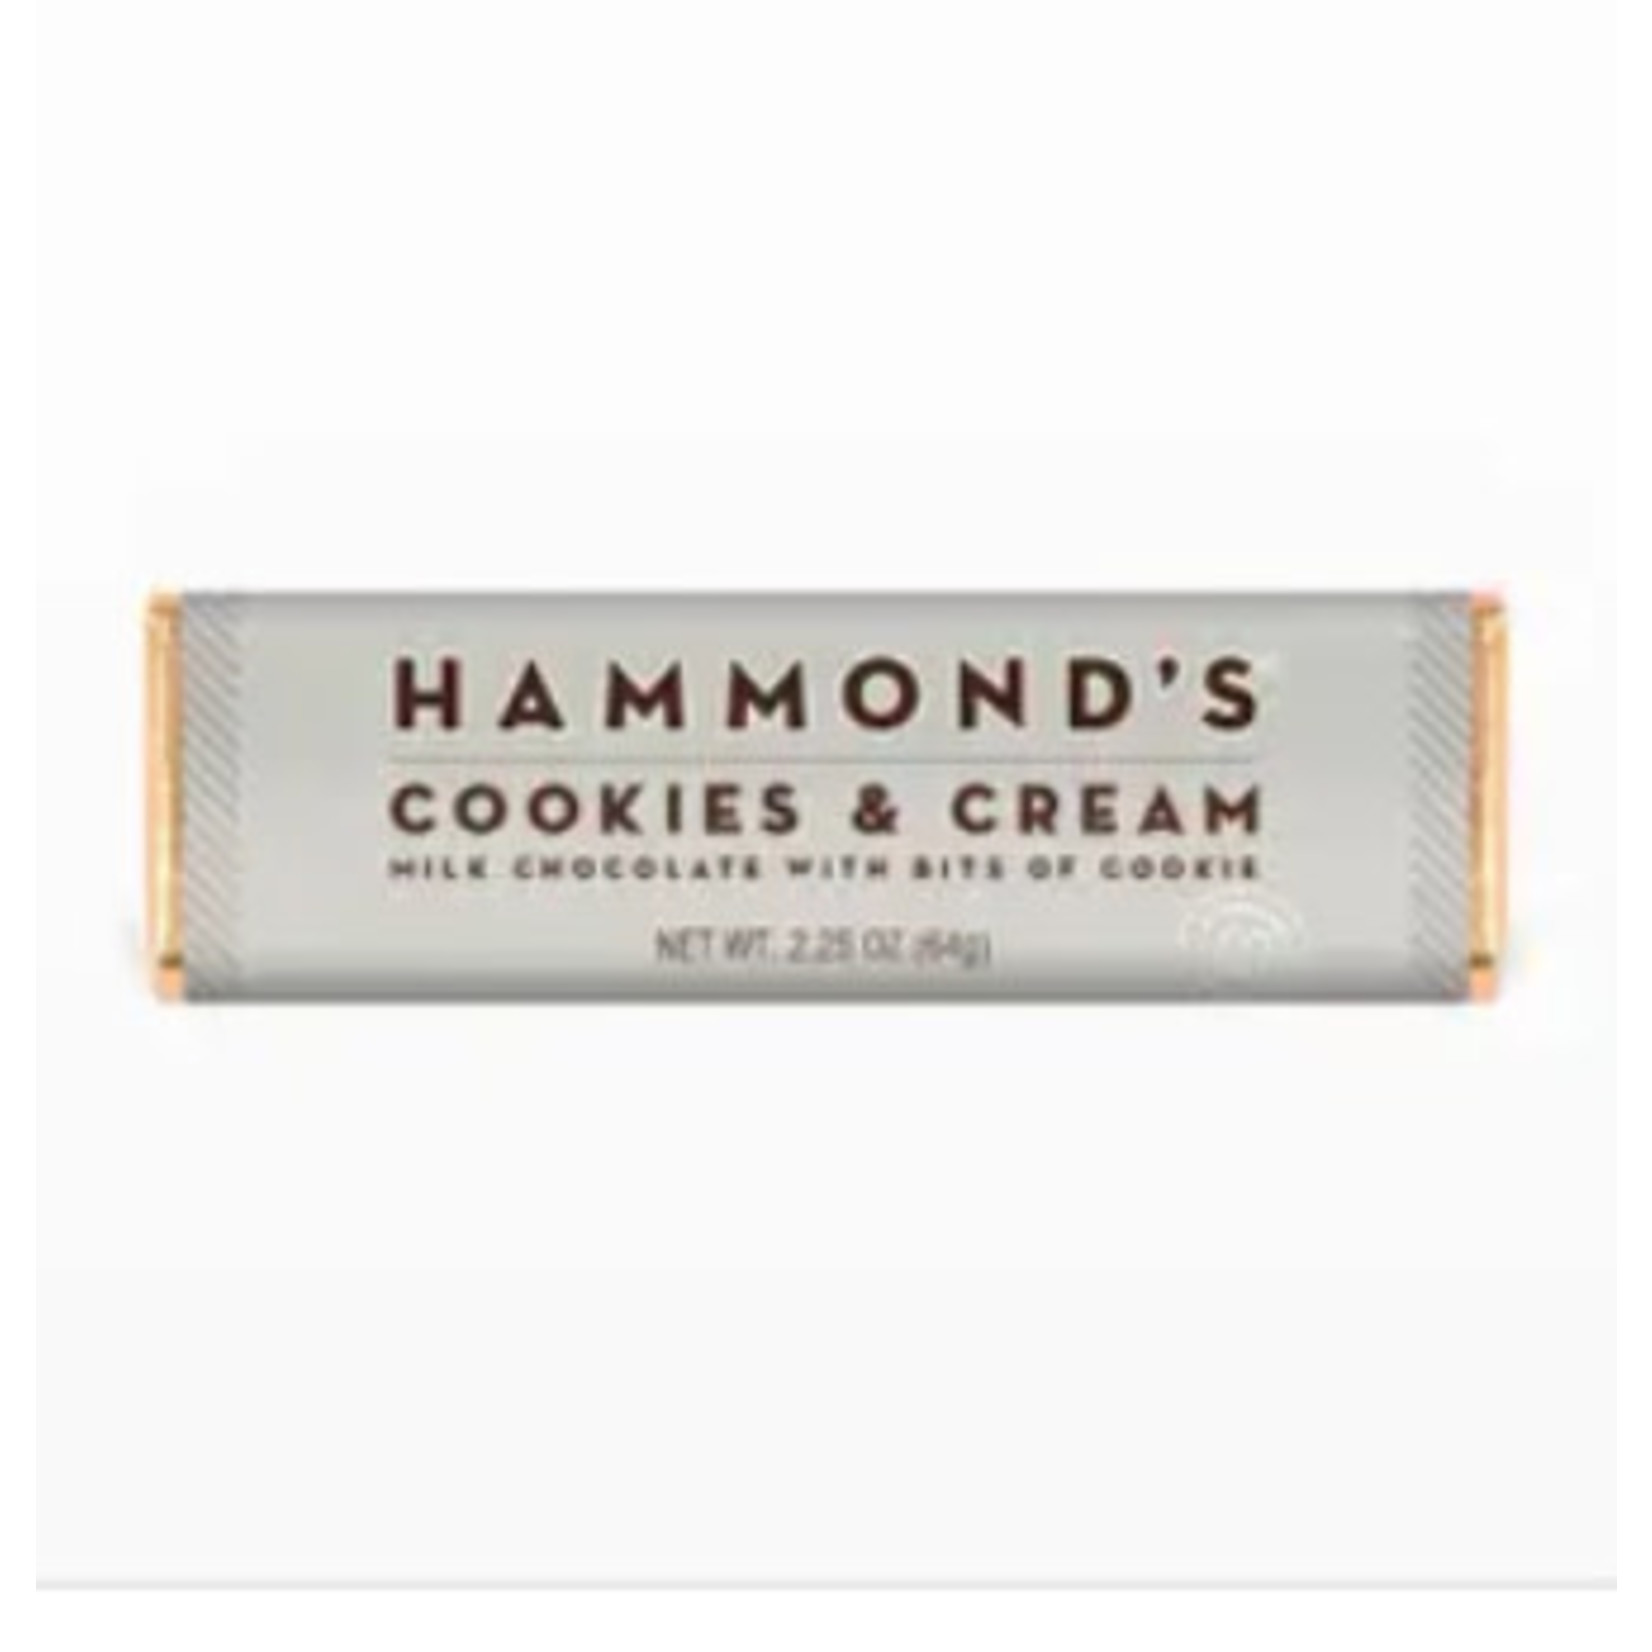 Hammond’s Candies Cookies and Creme Milk Chocolate Candy Bar